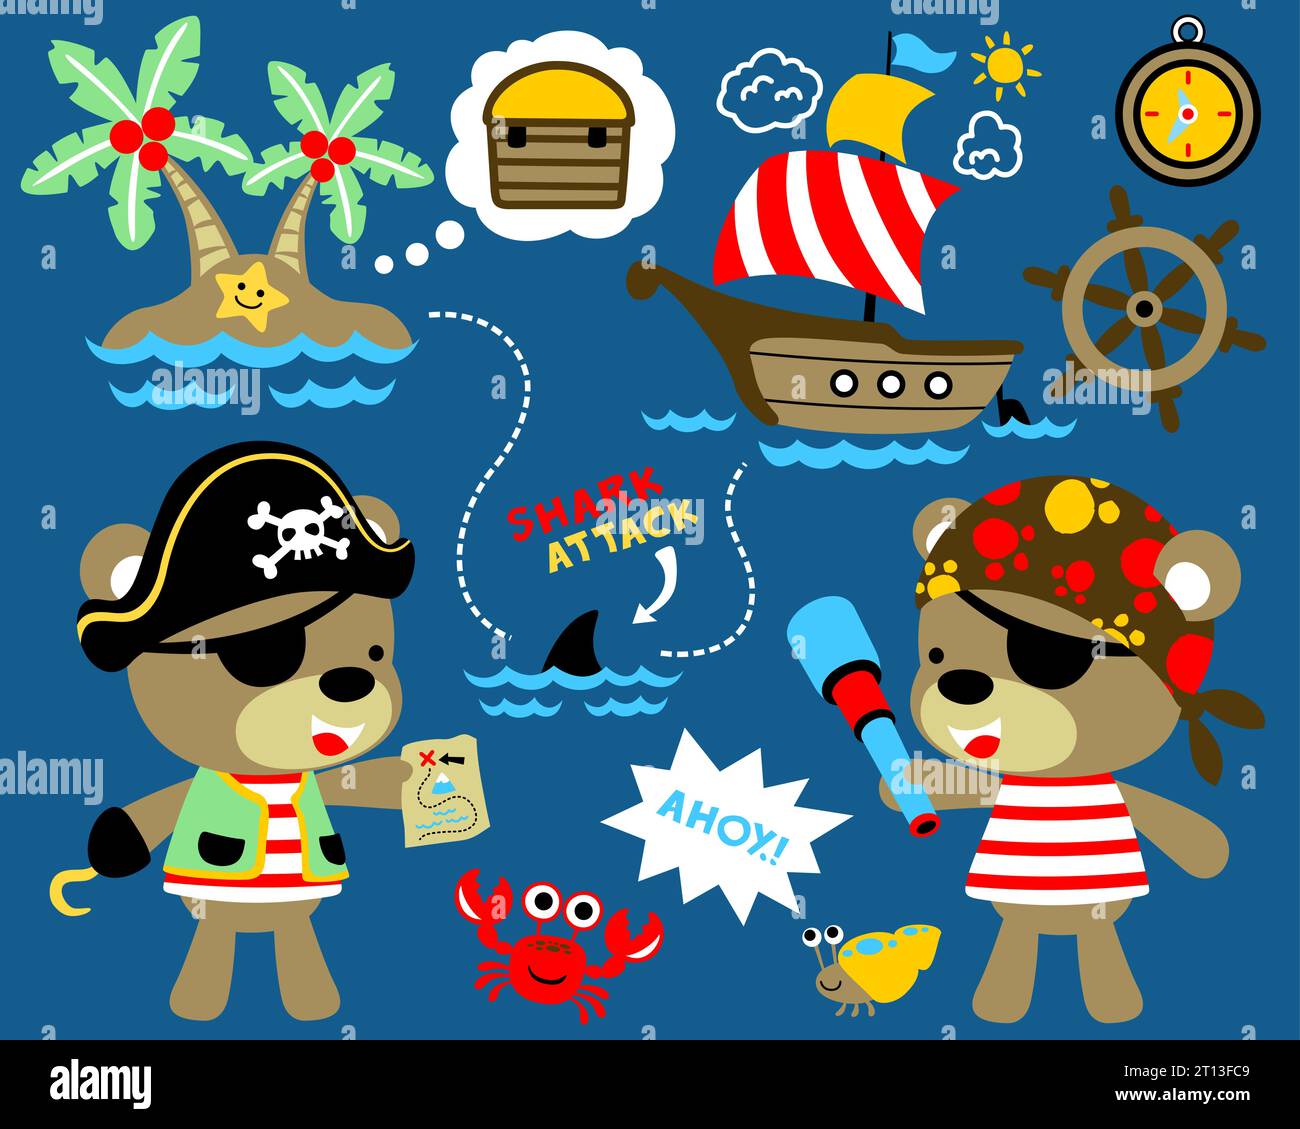 vector illustration of sailing theme set cartoon with funny pirates. Teddy bear in pirate costume with sailing elements Stock Vector